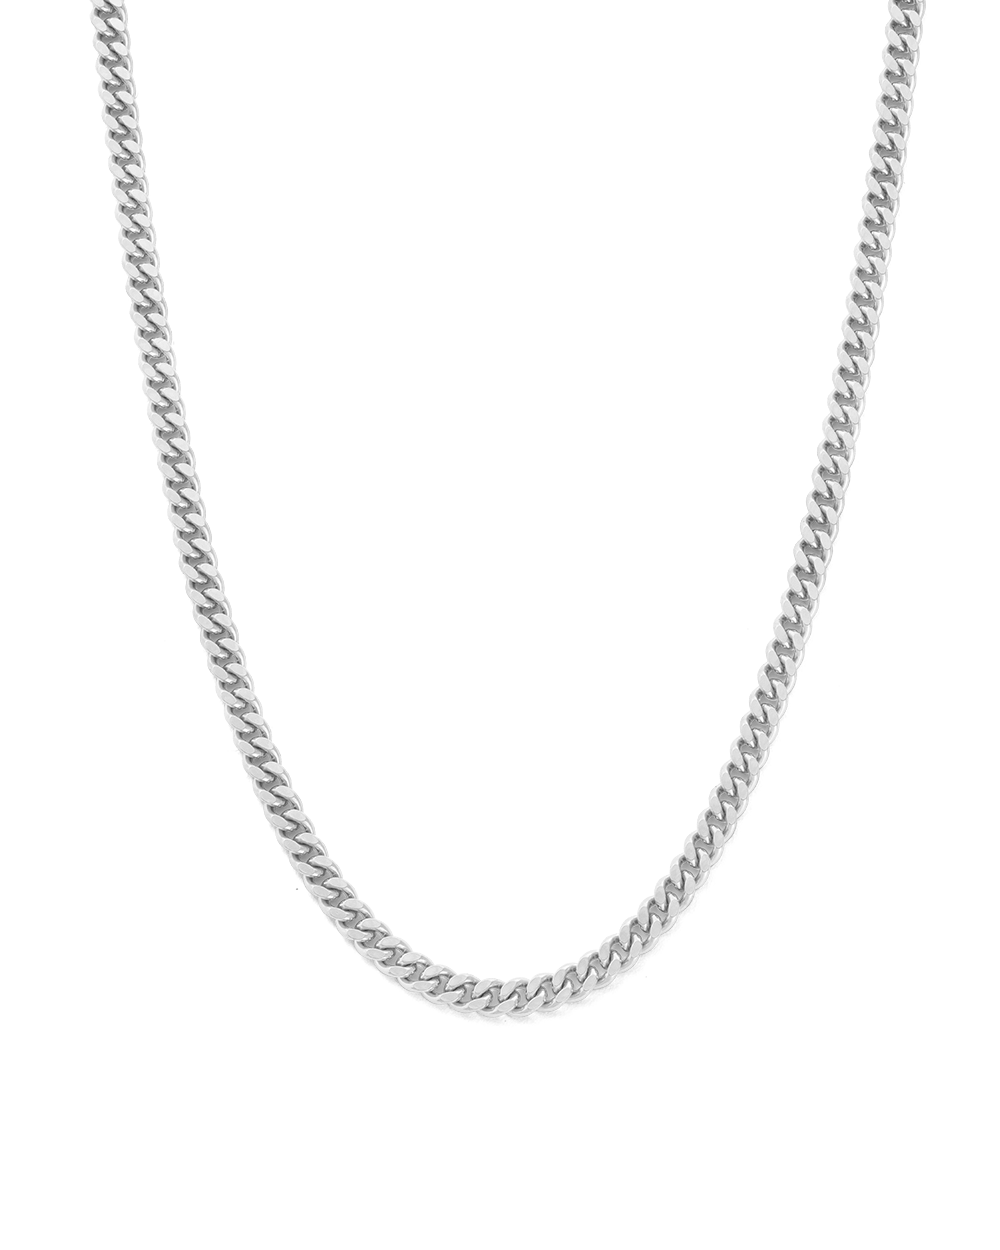 GLOW CHAIN NECKLACE (STERLING SILVER)